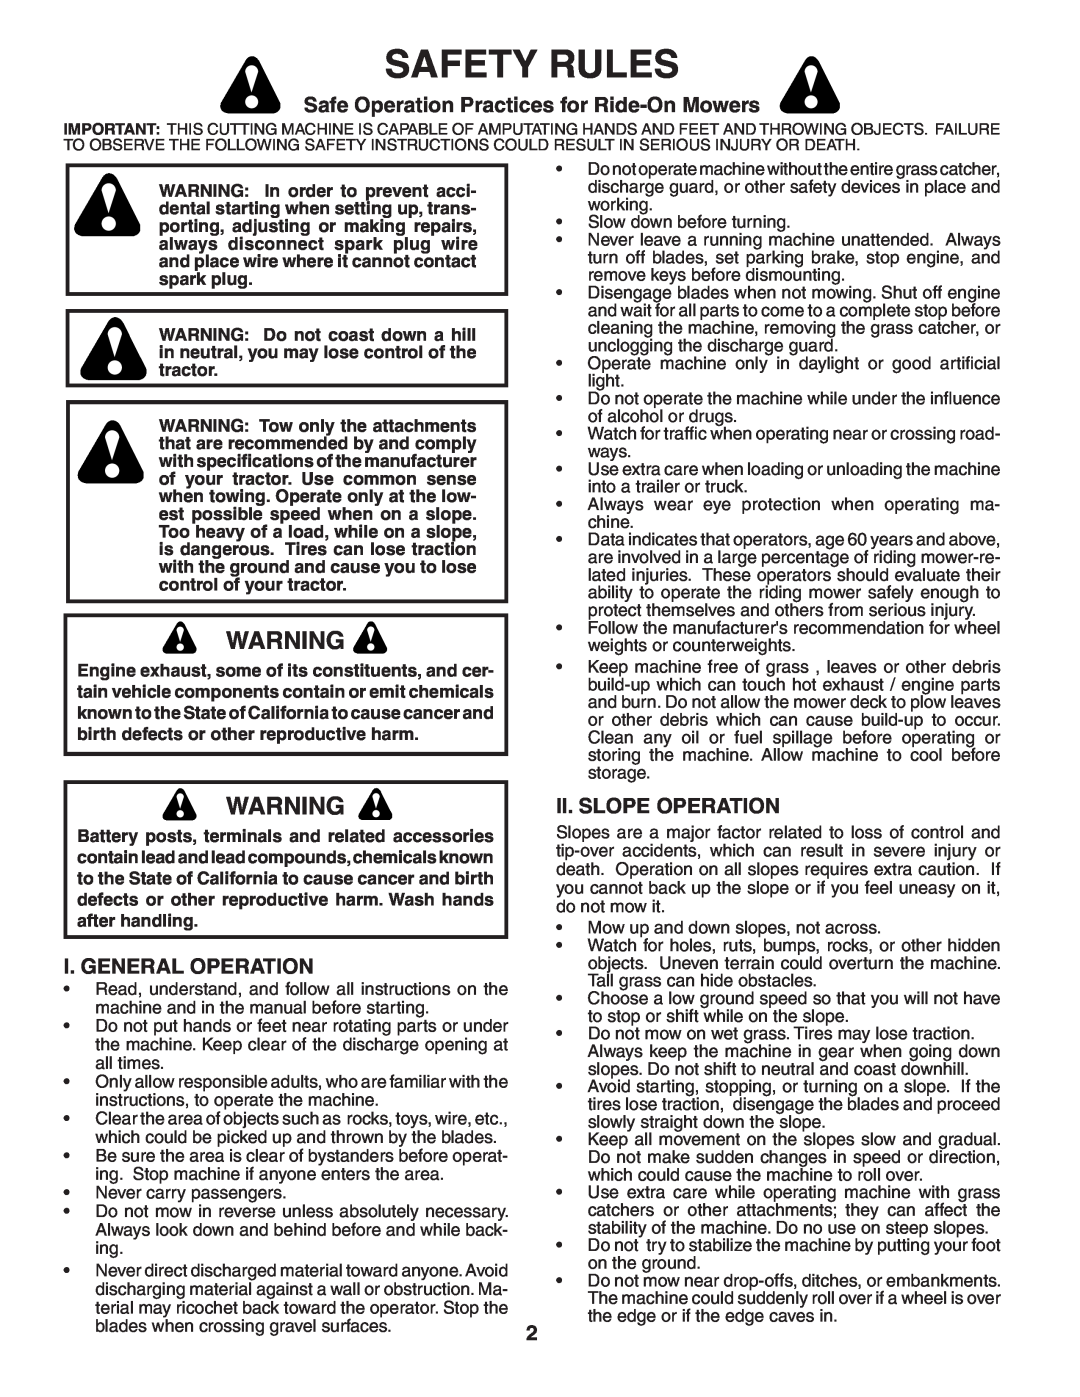 Poulan BB185H42LT Safety Rules, Safe Operation Practices for Ride-OnMowers, I. General Operation, Ii. Slope Operation 